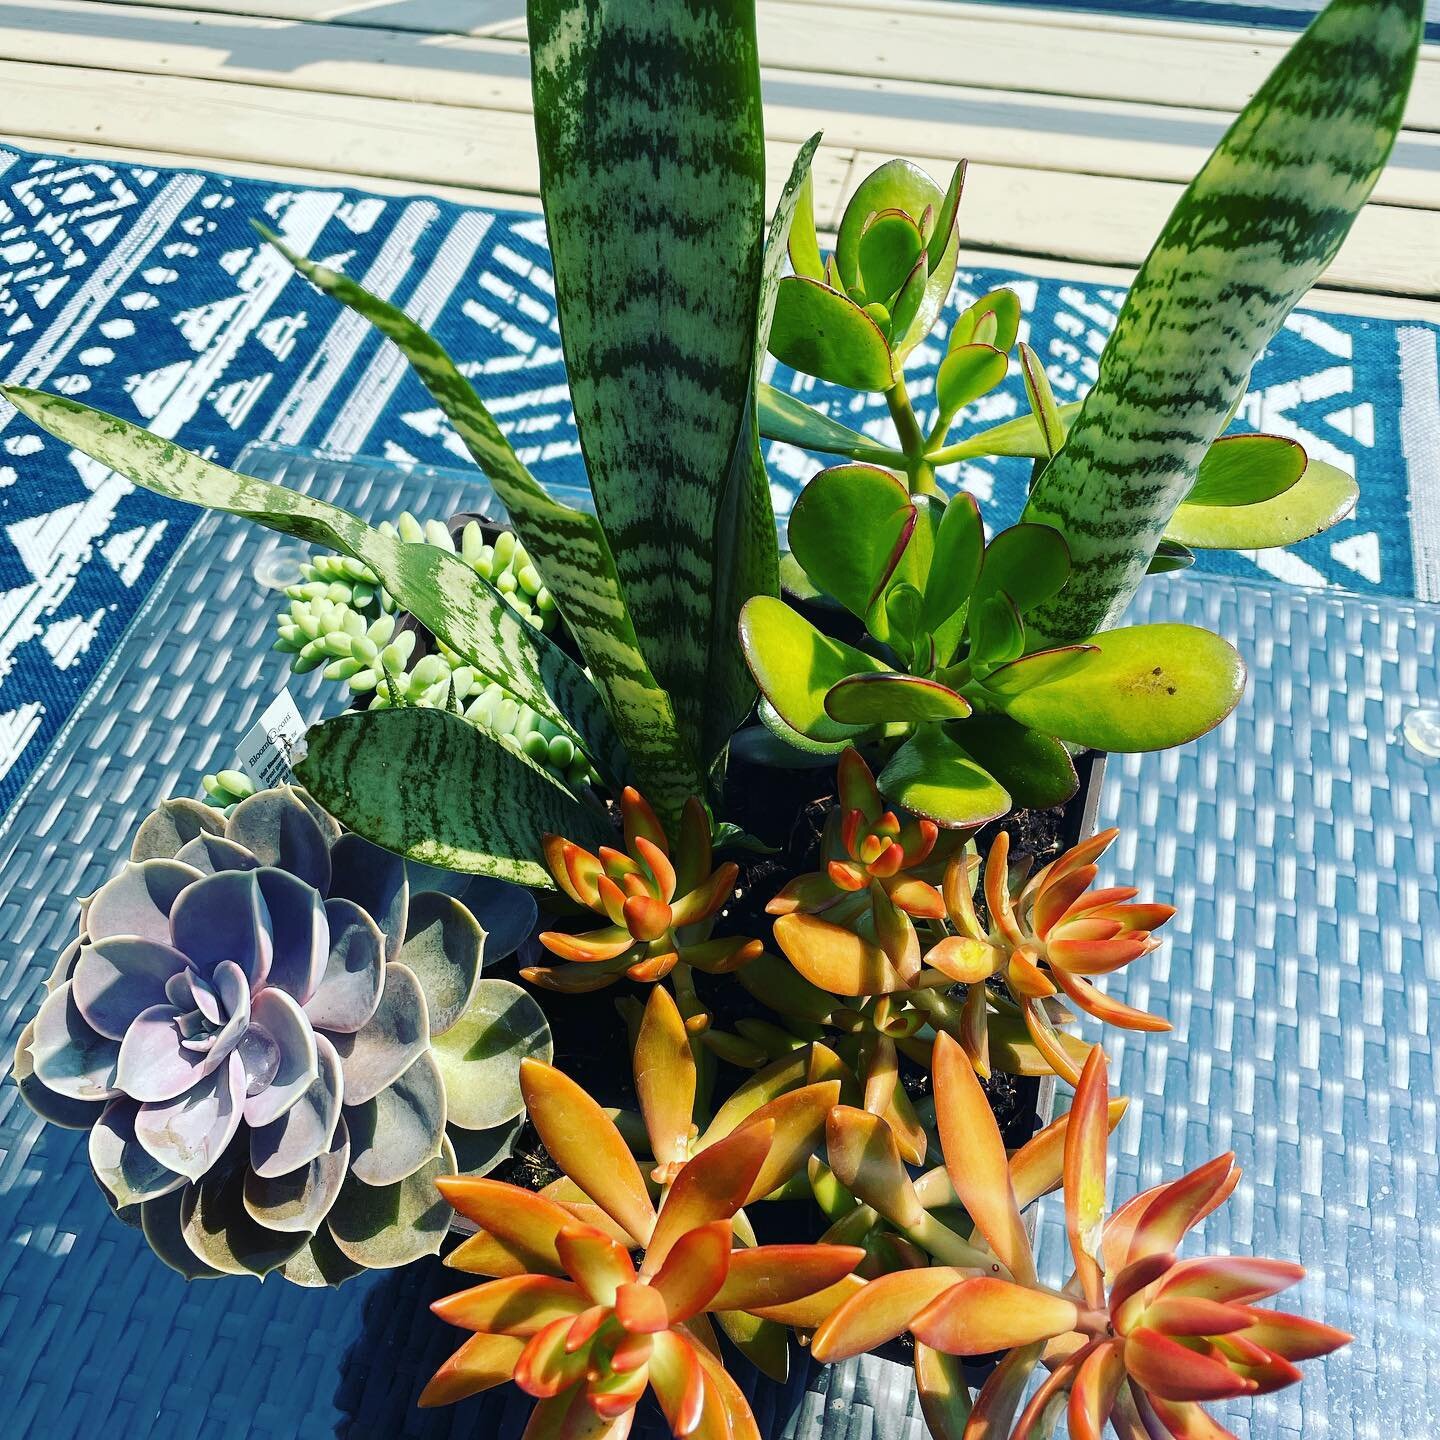 These succulent plants LOVE the heat. They also love dry soil, so let the soil dry completely between watering. This hearty plant will survive all winter indoors in bright indirect light. Find these succulents and more at Swedberg Nursery. 

Open Mon